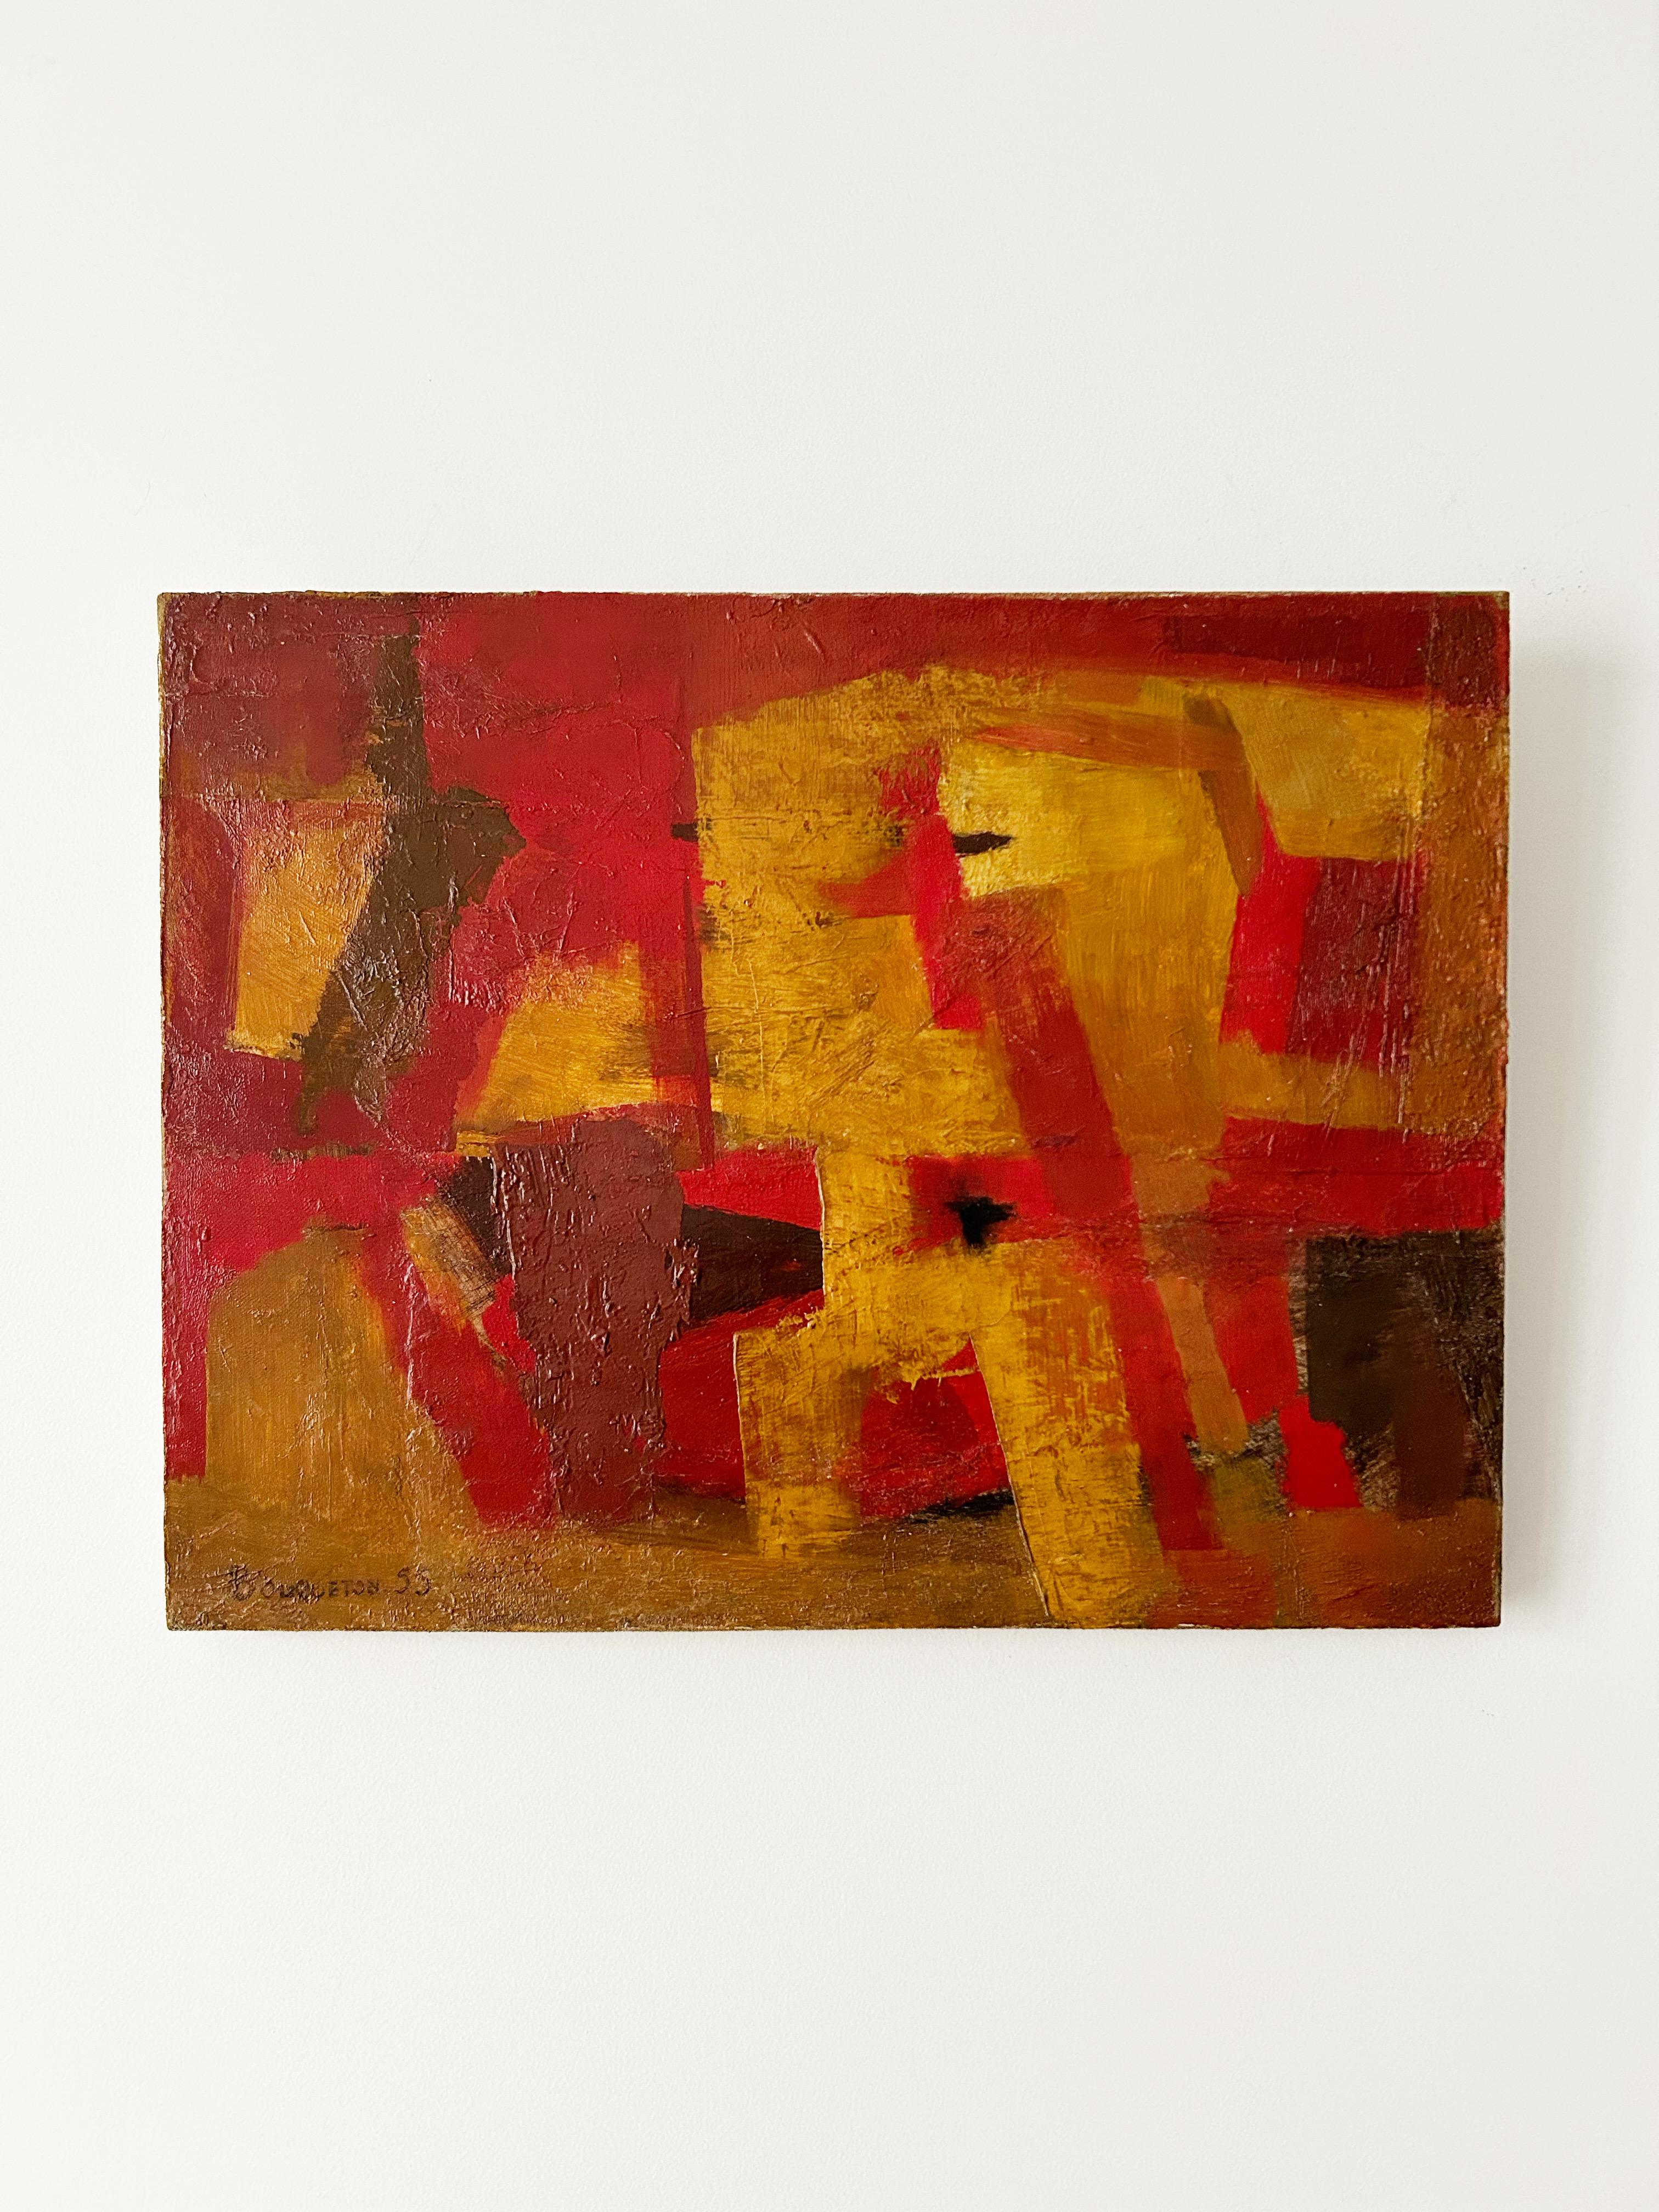 Marcel BOUQUETON (1921-2006)
Red and Yellow, 1955
Oil on canvas
Signed and dated “55” lower right ; dated “55” on the reverse
27 x 35 cm

Born in Constantine in 1921, Marcel Bouqueton spent his childhood in Algeria. Showing an early interest in